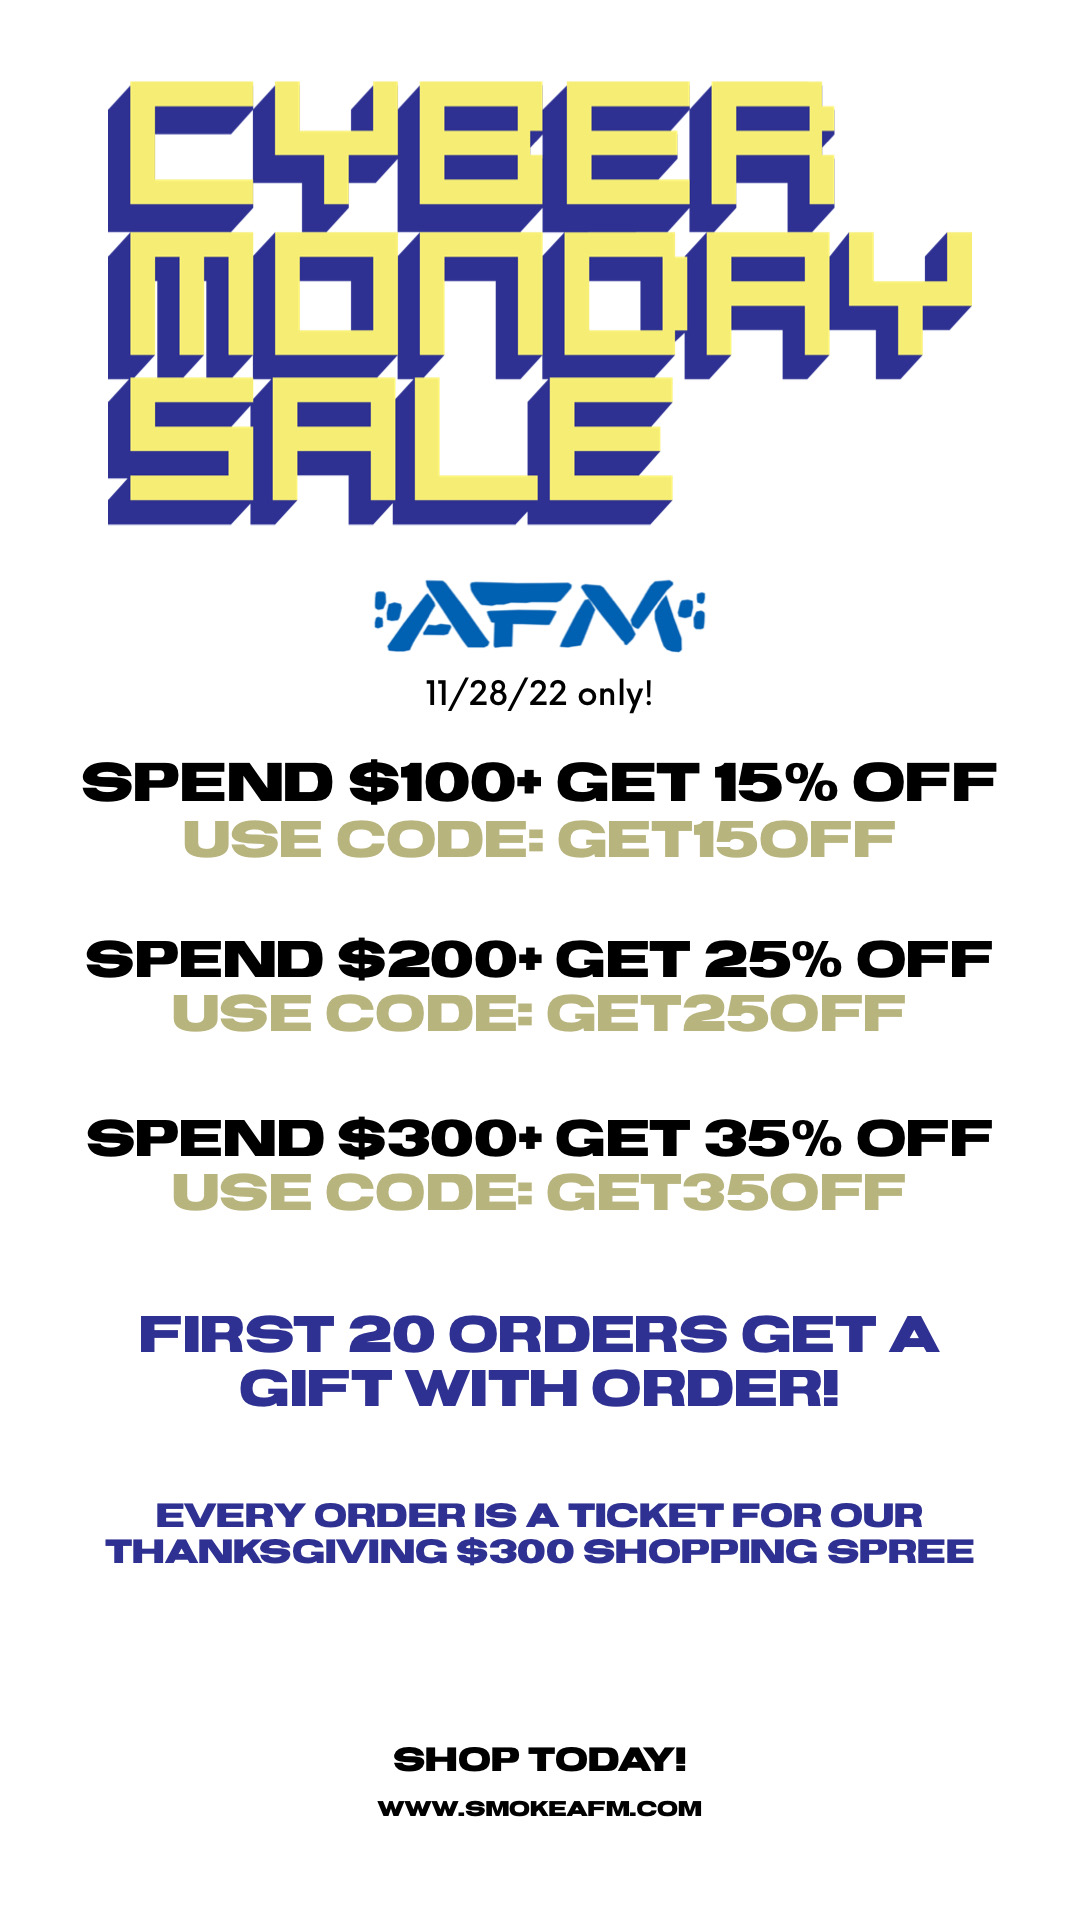  ATM 112822 only! SPEND $100 GET 15% OFF USE CODE: GET1S5OFF SPEND $200 GET 25% OFF USE CODE: GET250FF SPEND $300 GET 35% OFF USE CODE: GET350FF FIRST 20 ORDERS GET A GIFT WITH ORDER! EVERY ORDERIS A TICKET FOR OUR THANKSGIVING $300 SHOPPING SPREE SHOP TODAY! WWW.SMOKEAFM.COM 